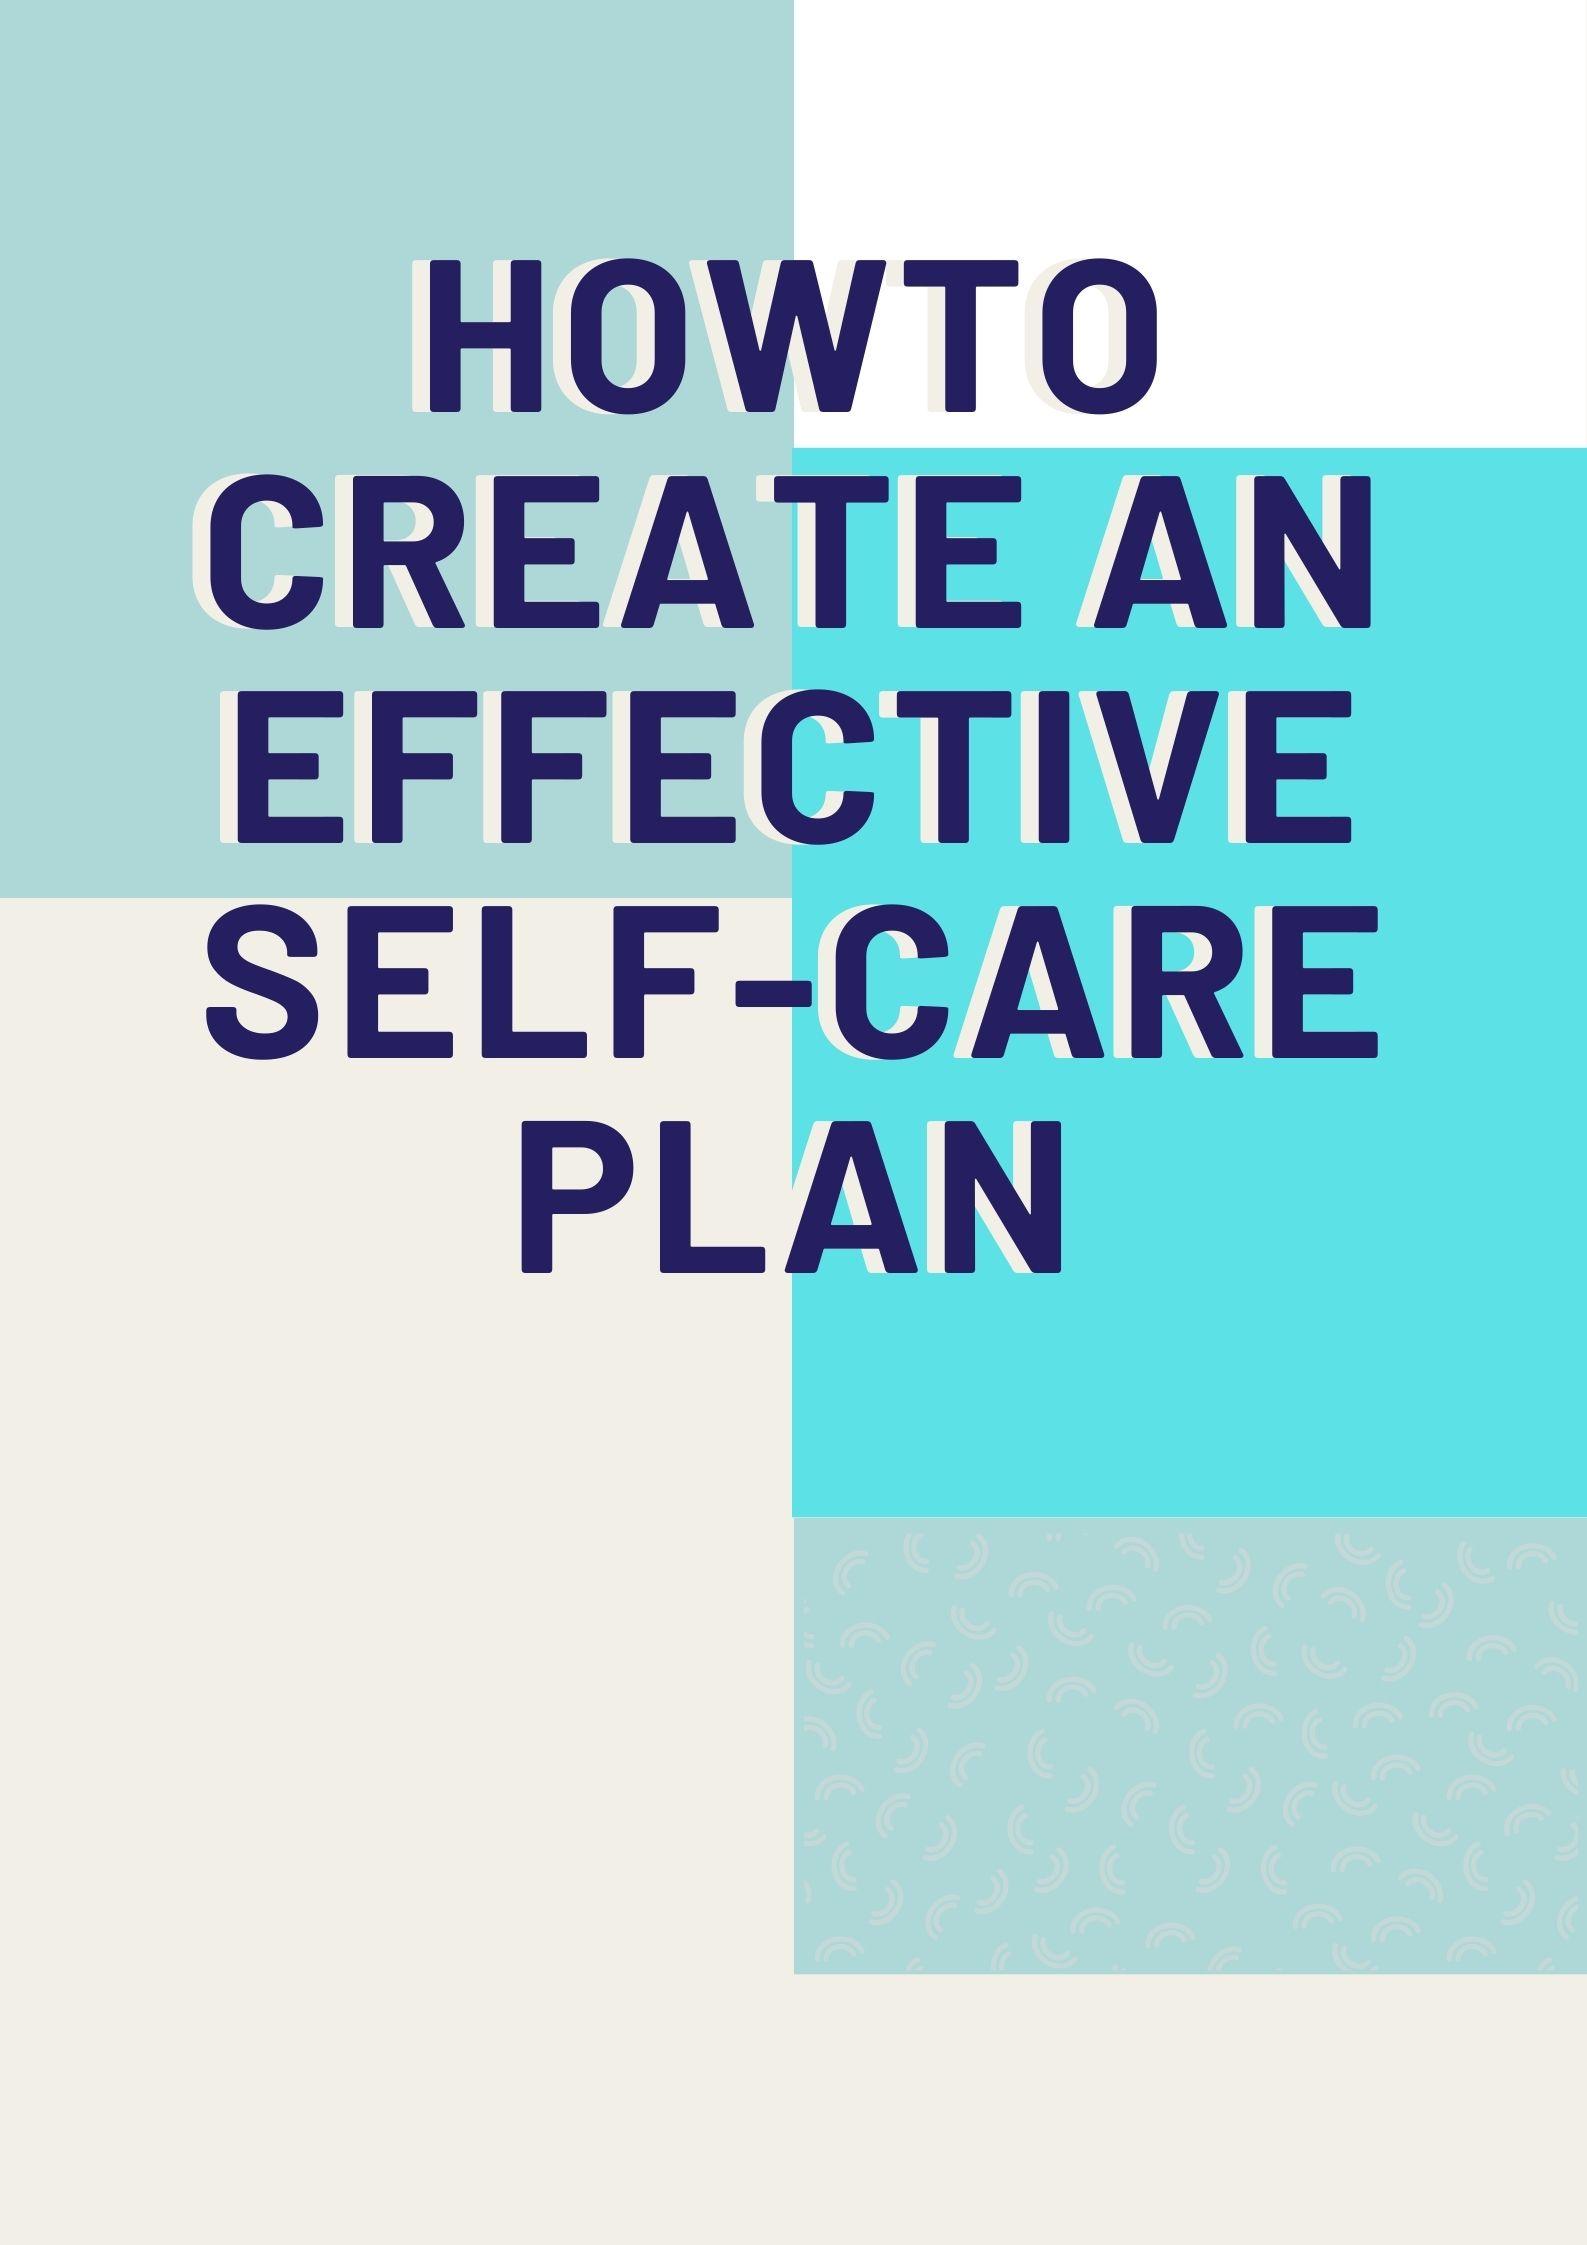 Complete Guide with 5 Simple Steps Creating Successful Self-care Plan